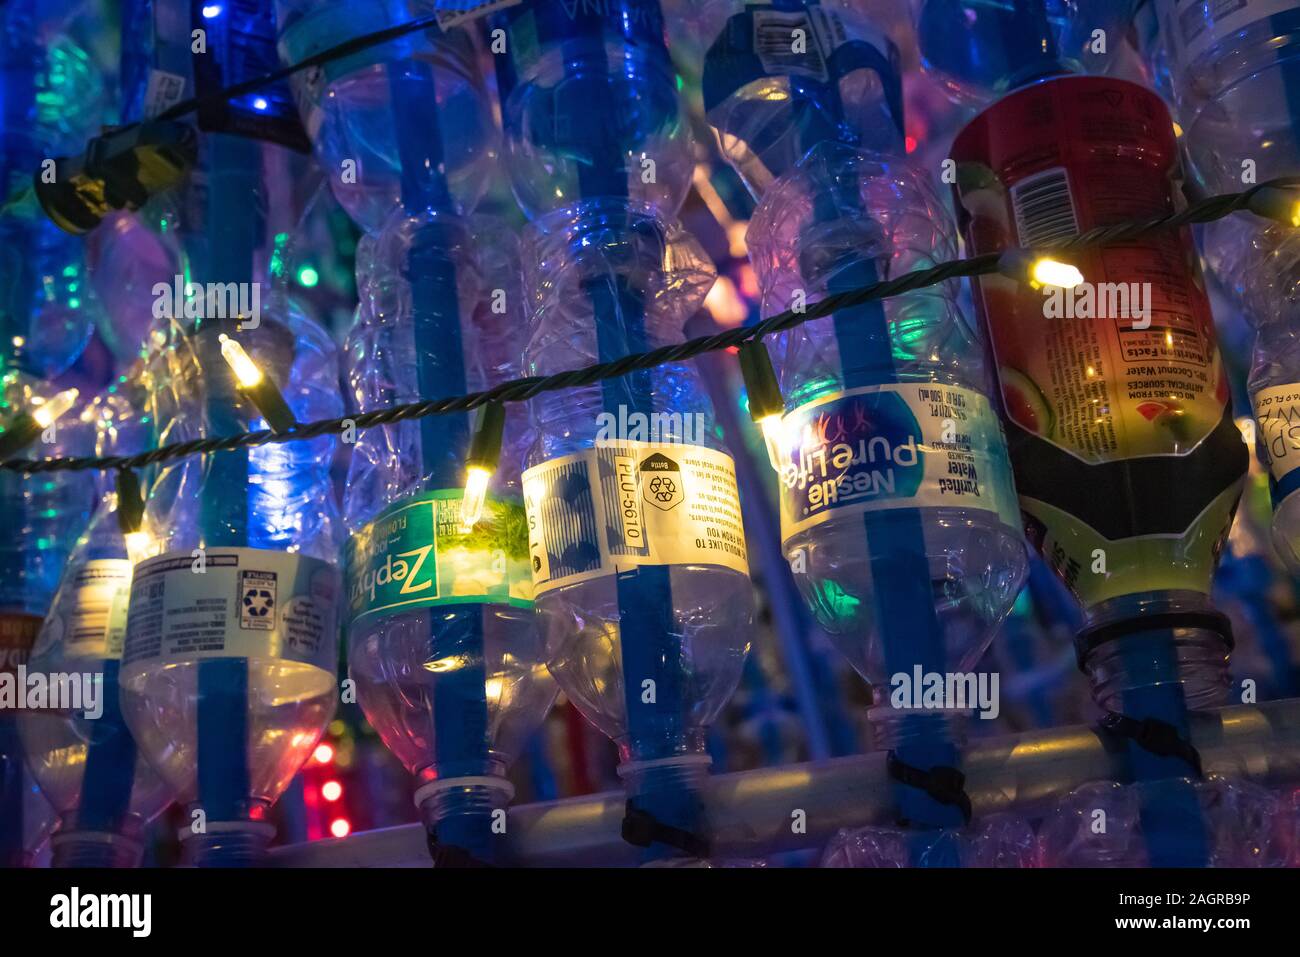 Lighted plastic bottles used in a large-scale recycled sculpture for Jacksonville Beach's holiday season public art event, Deck the Chairs. Stock Photo